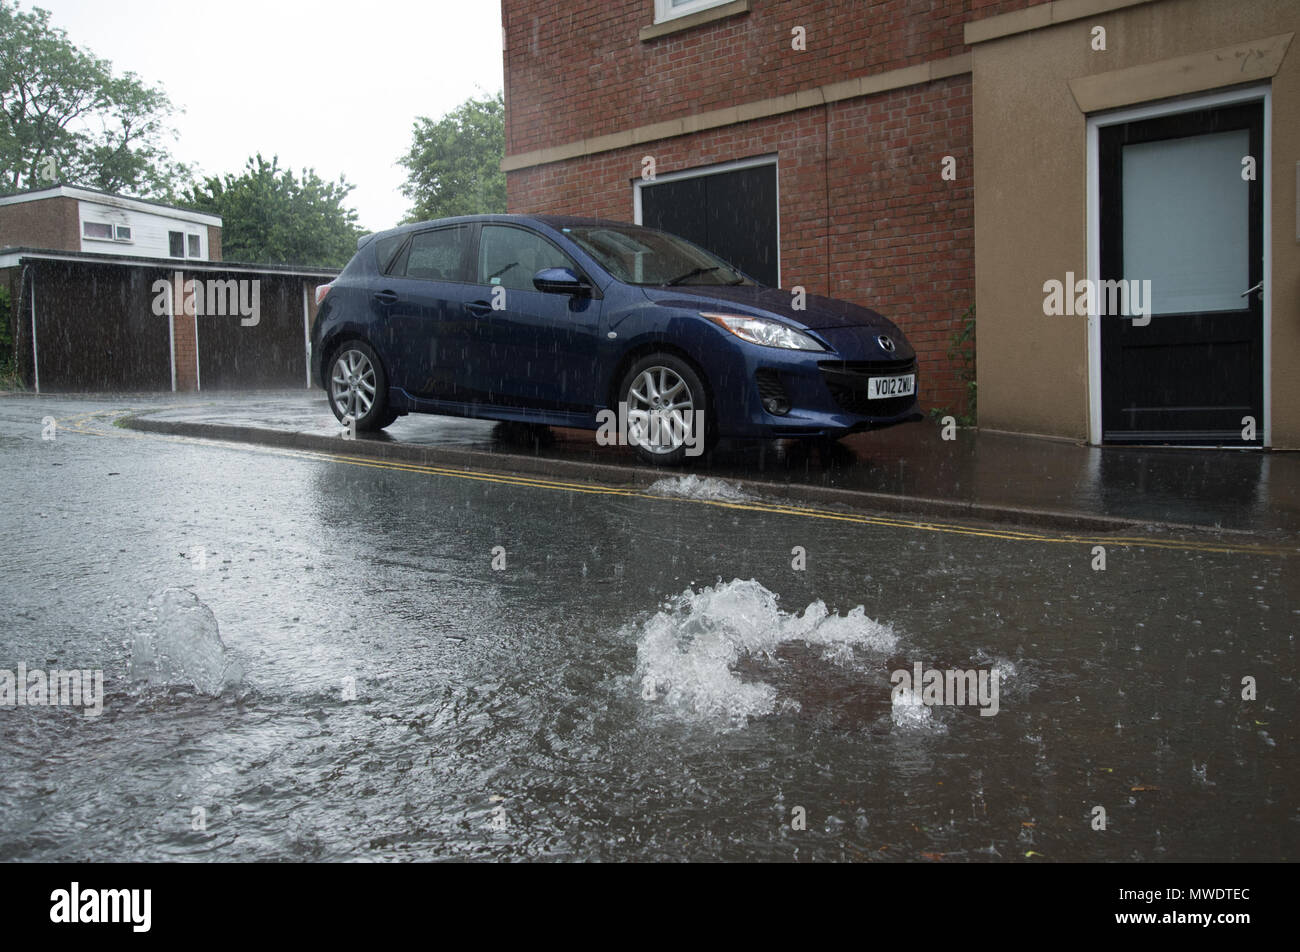 Shrewsbury, Shropshire, UK. 1st June 2018. A car has a lucky escape when it was moved to higher ground, away from the flooded streets and overflowing drains following flash floods in Coleham, close to Shrewsbury town centre and the River Severn. Within minutes, local shops were flooded and the road was eventually sealed off by the fire brigade. Credit: Richard Franklin/Alamy Live News Stock Photo